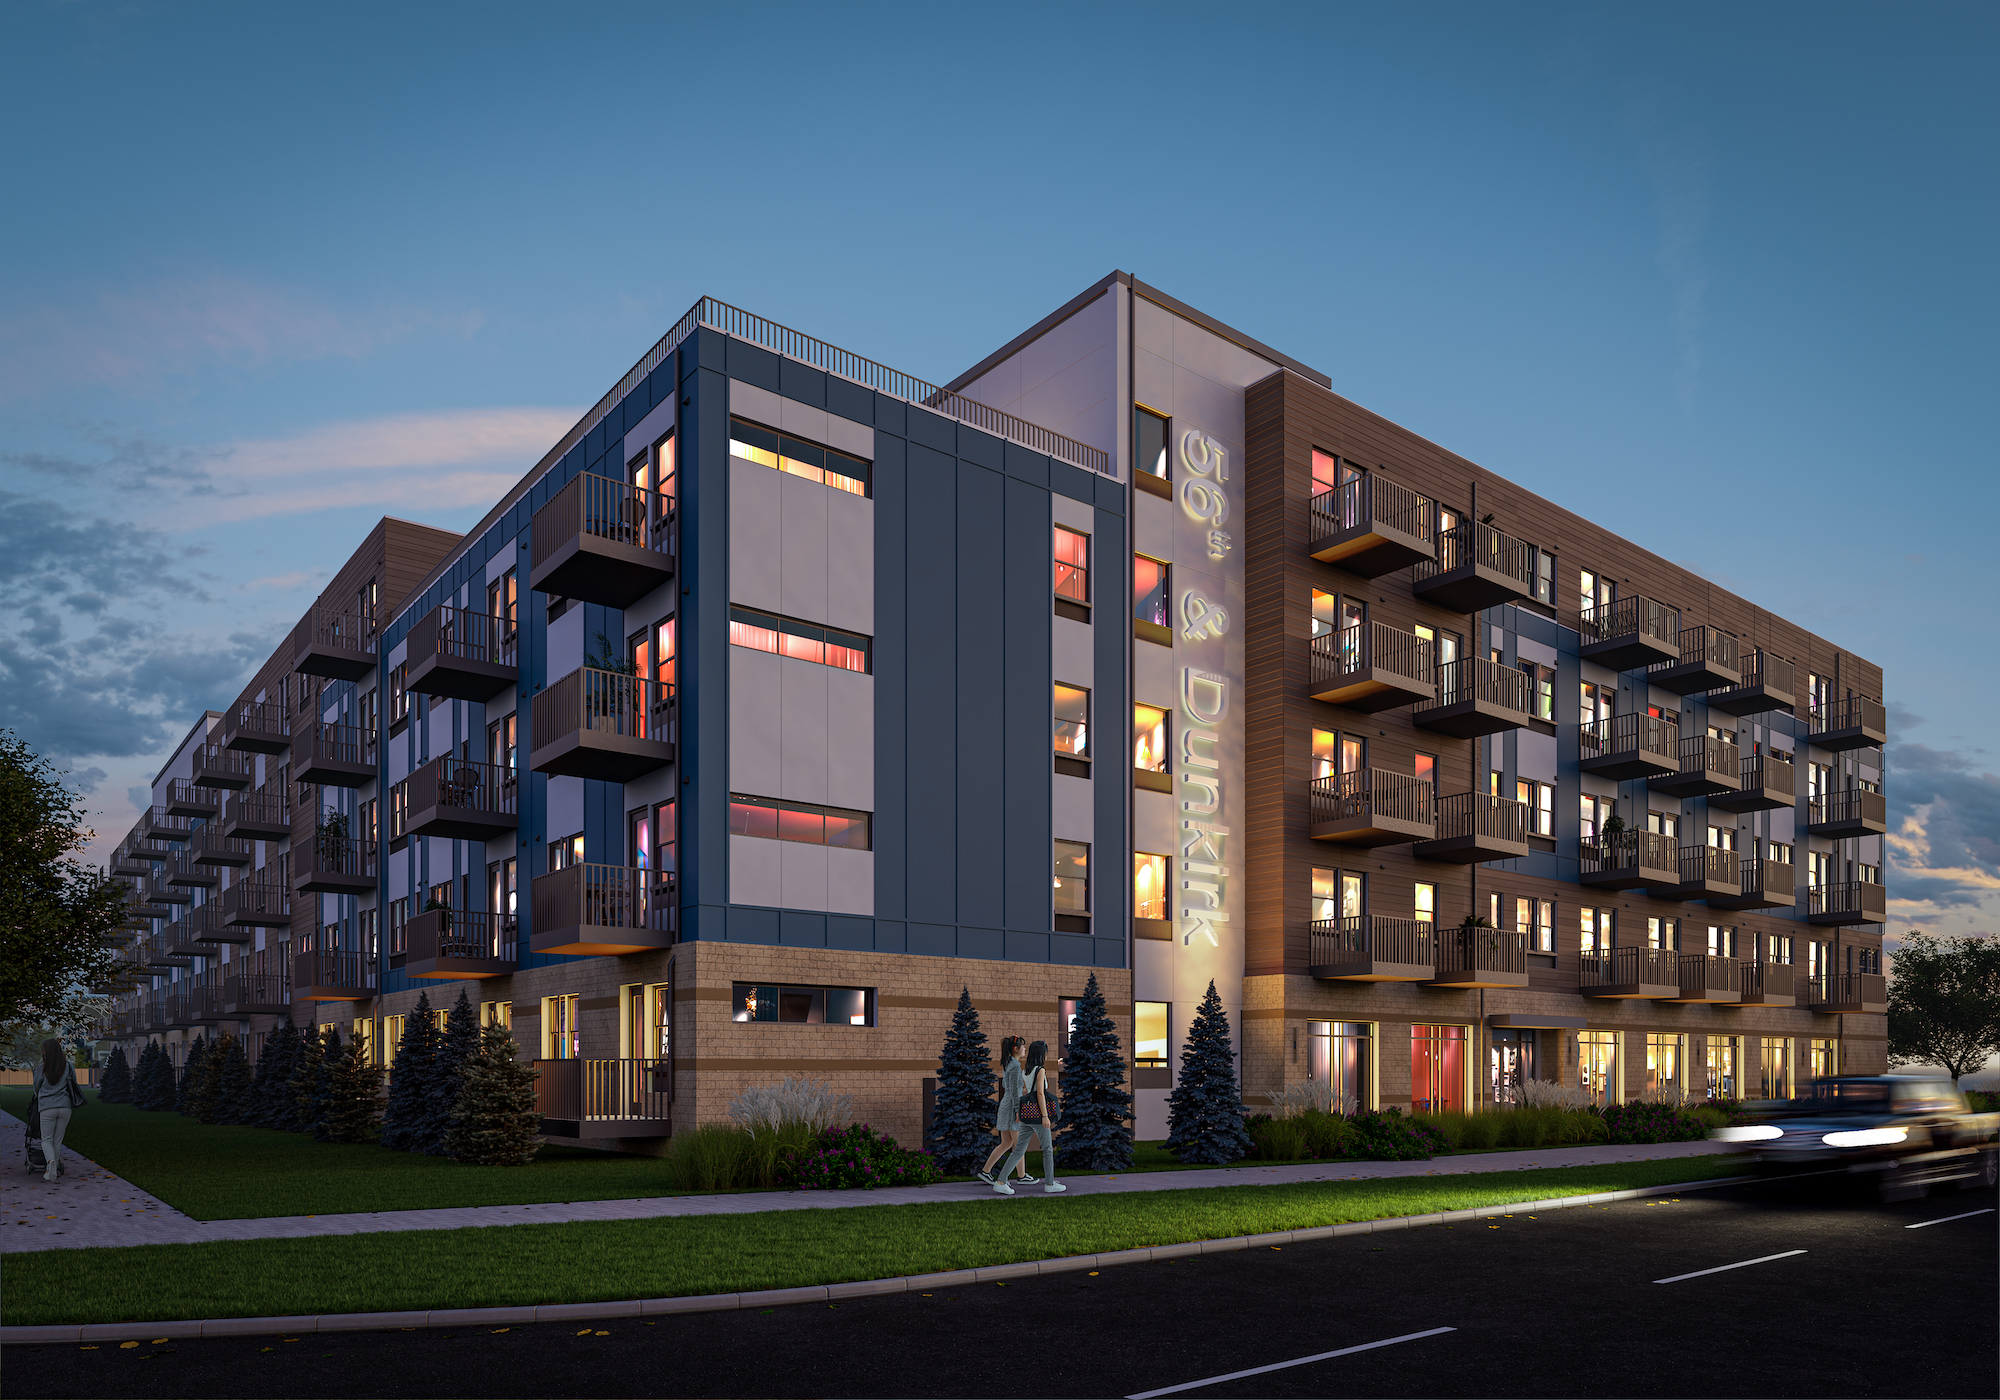 Rendering for the 56th and Dunkirk project in Denver, Colorado